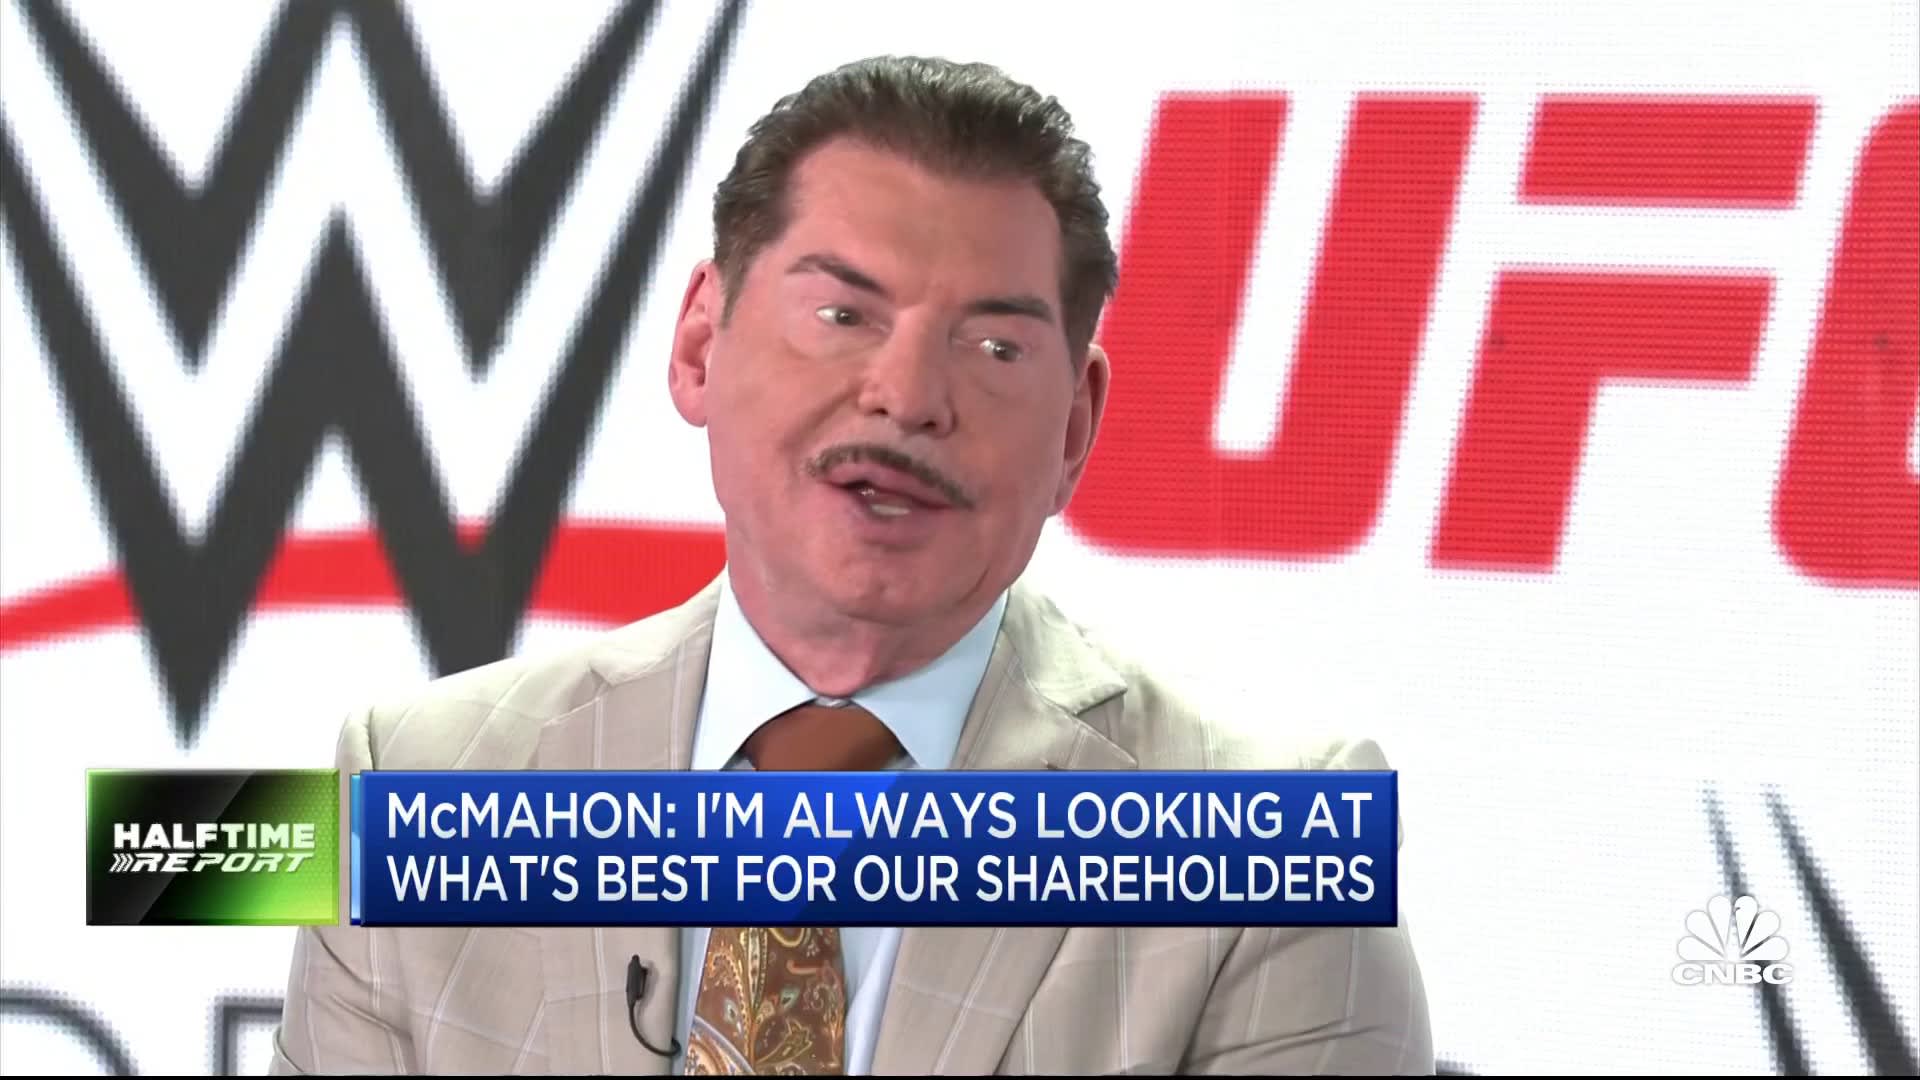 Endeavor-UFC deal is the next evolution of WWE, says Vince McMahon